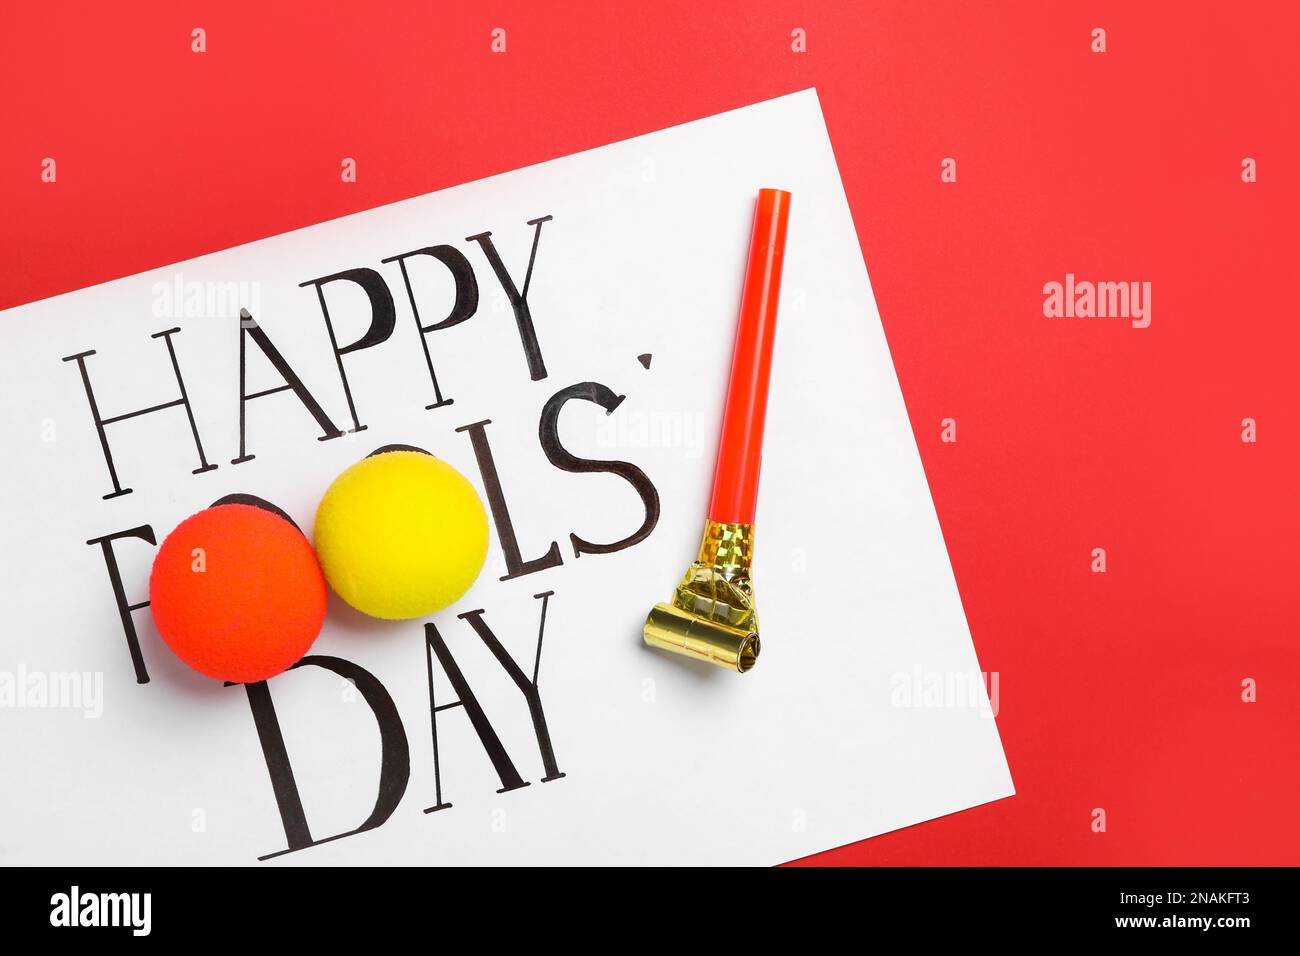 Sheet of paper with phrase Happy Fools' Day, clown noses and party blower on red background, flat lay Stock Photo